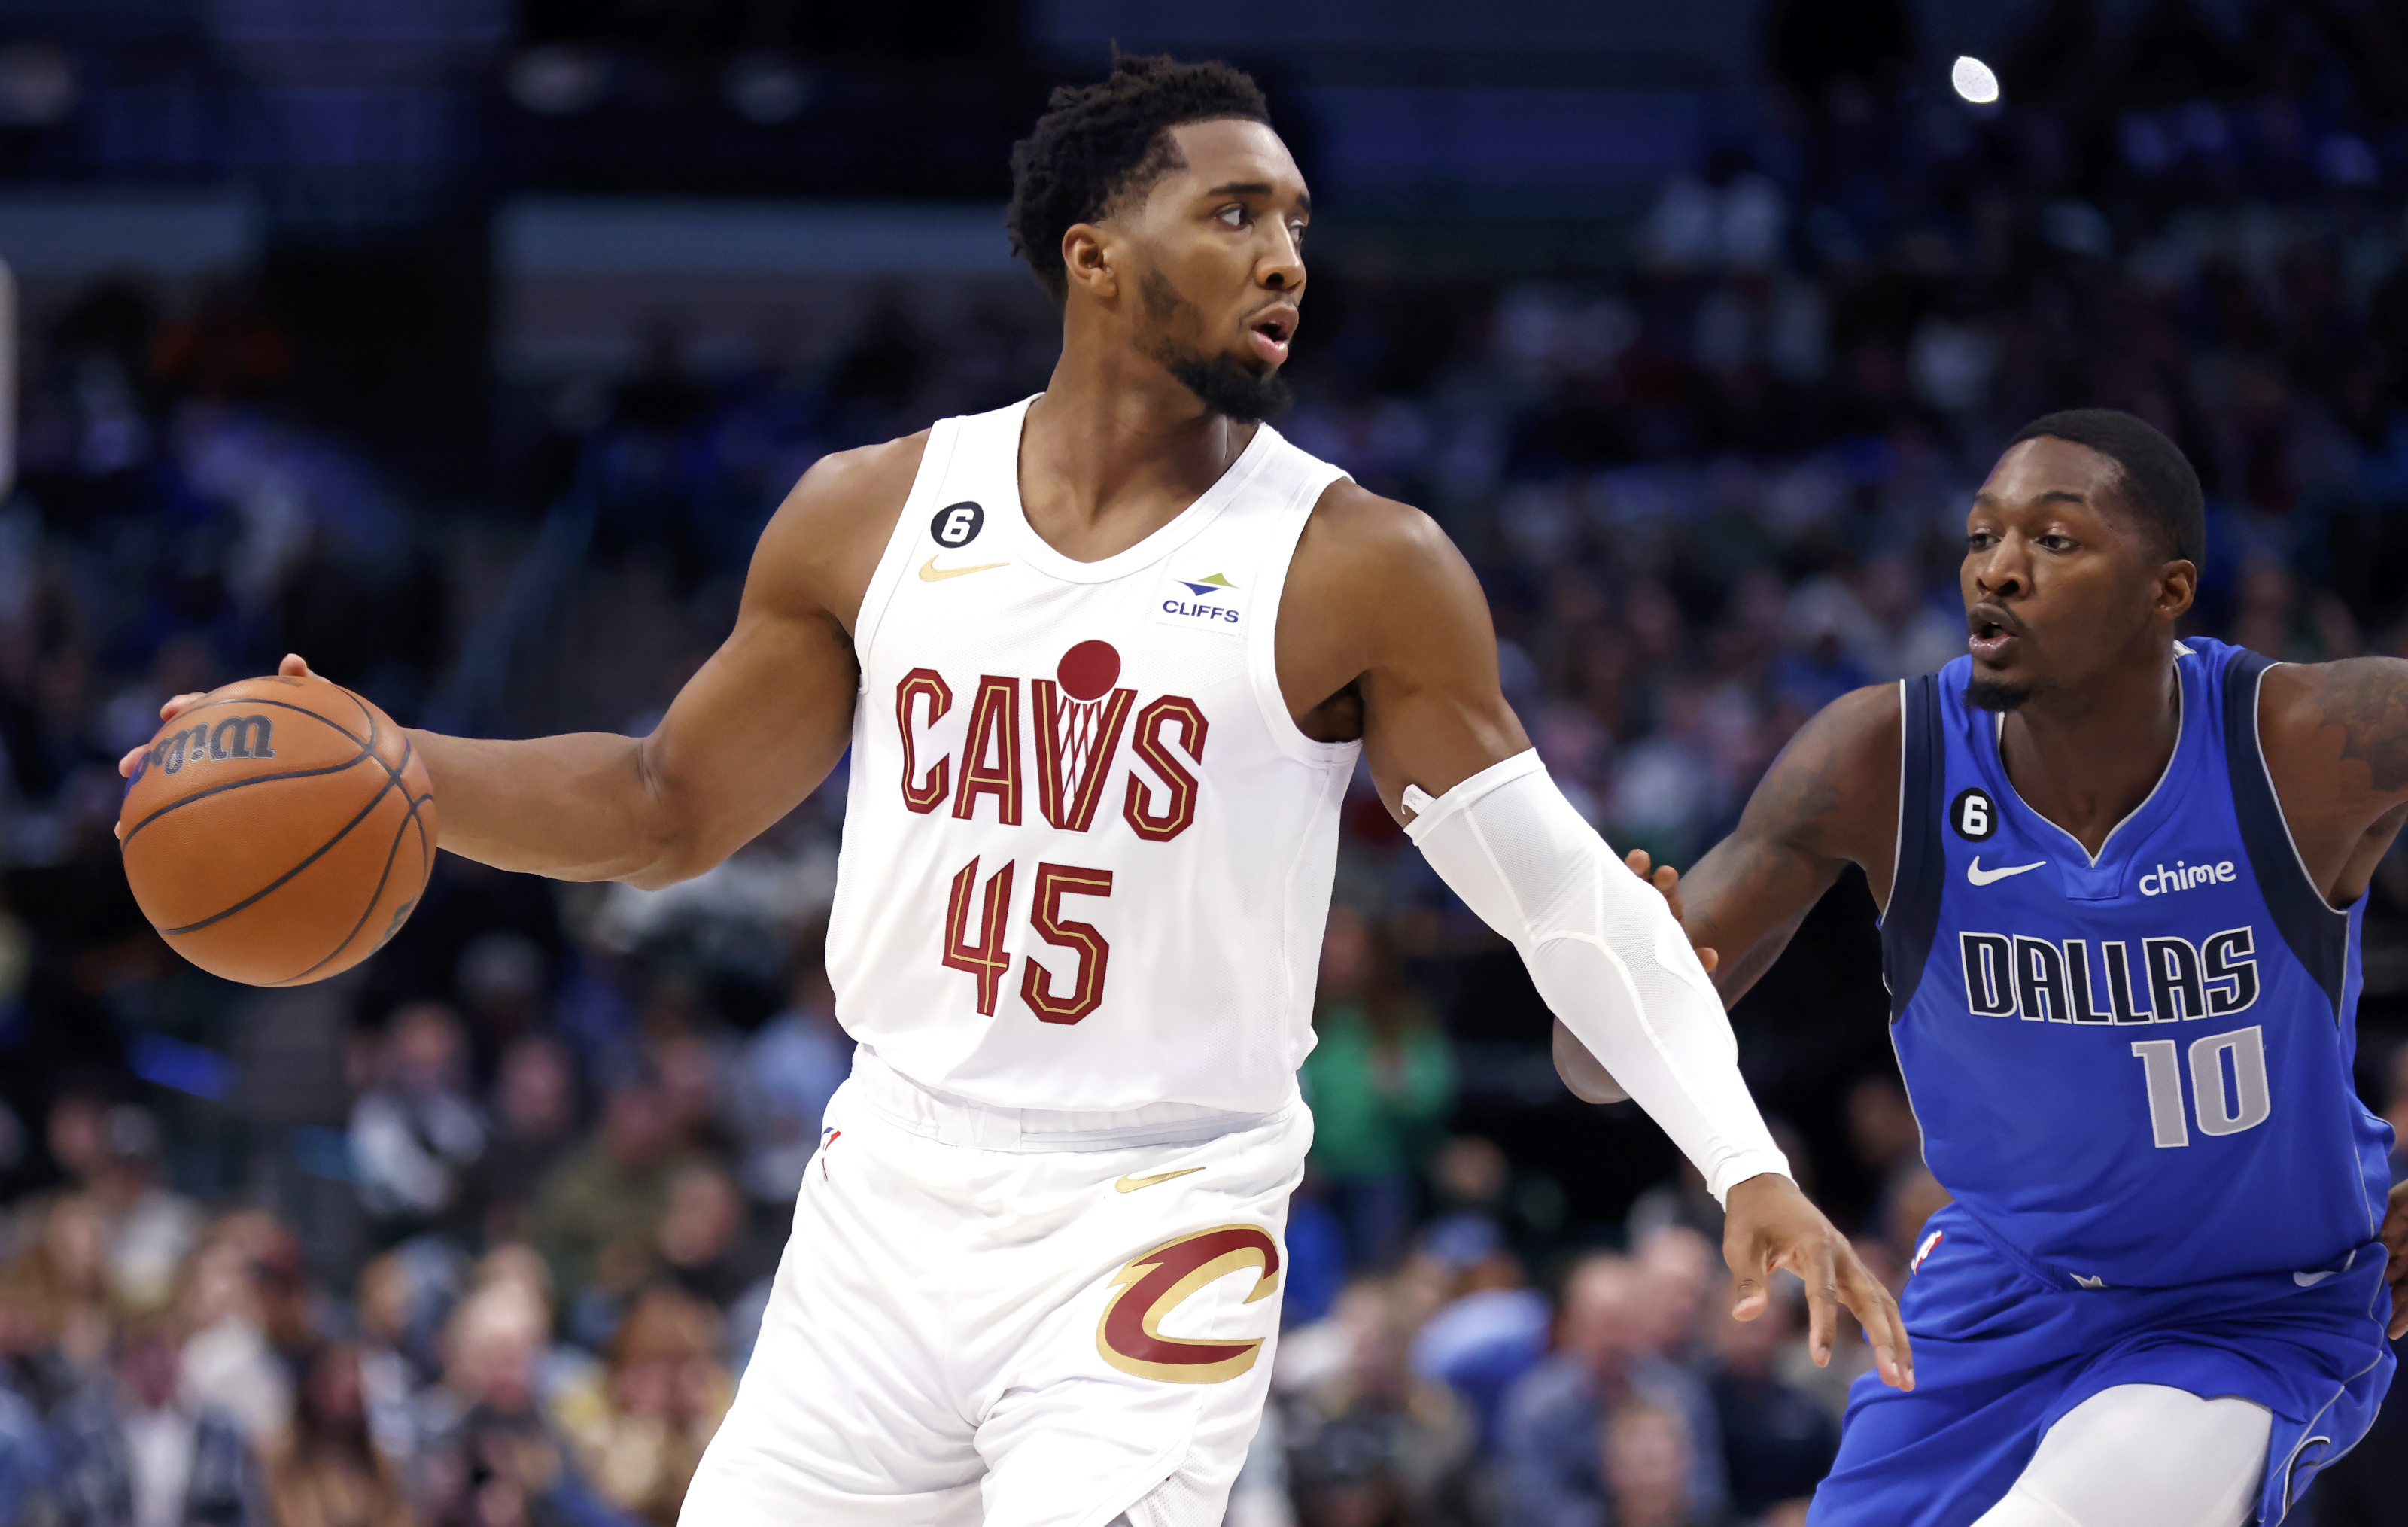 Two Cleveland Cavaliers Inside Top-10 Of FanSided's NBA “25-Under-25” List  - Sports Illustrated Cleveland Cavs News, Analysis and More